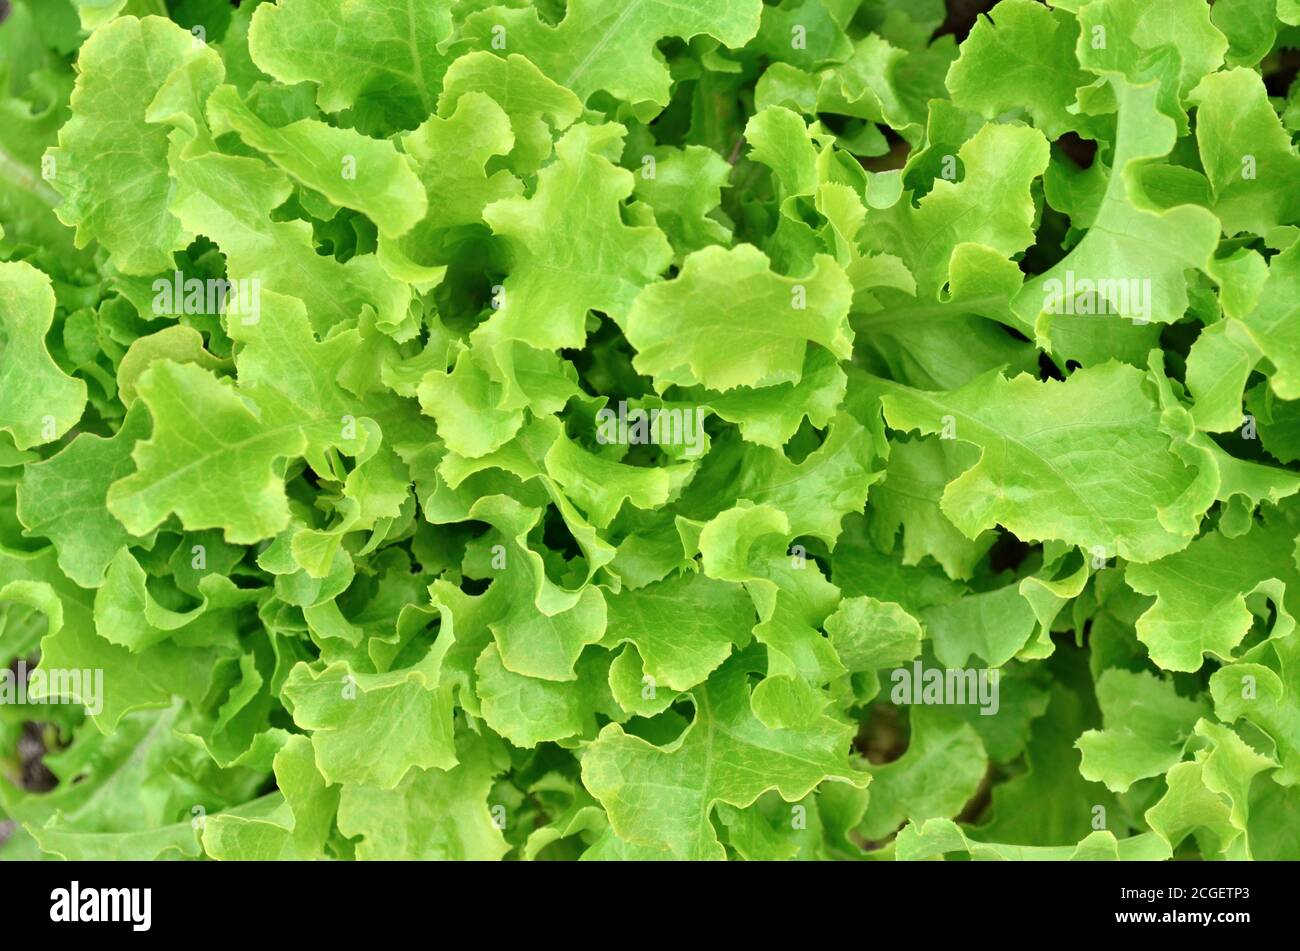 Fresh green salad as a nature background. Close-up, top view Stock Photo